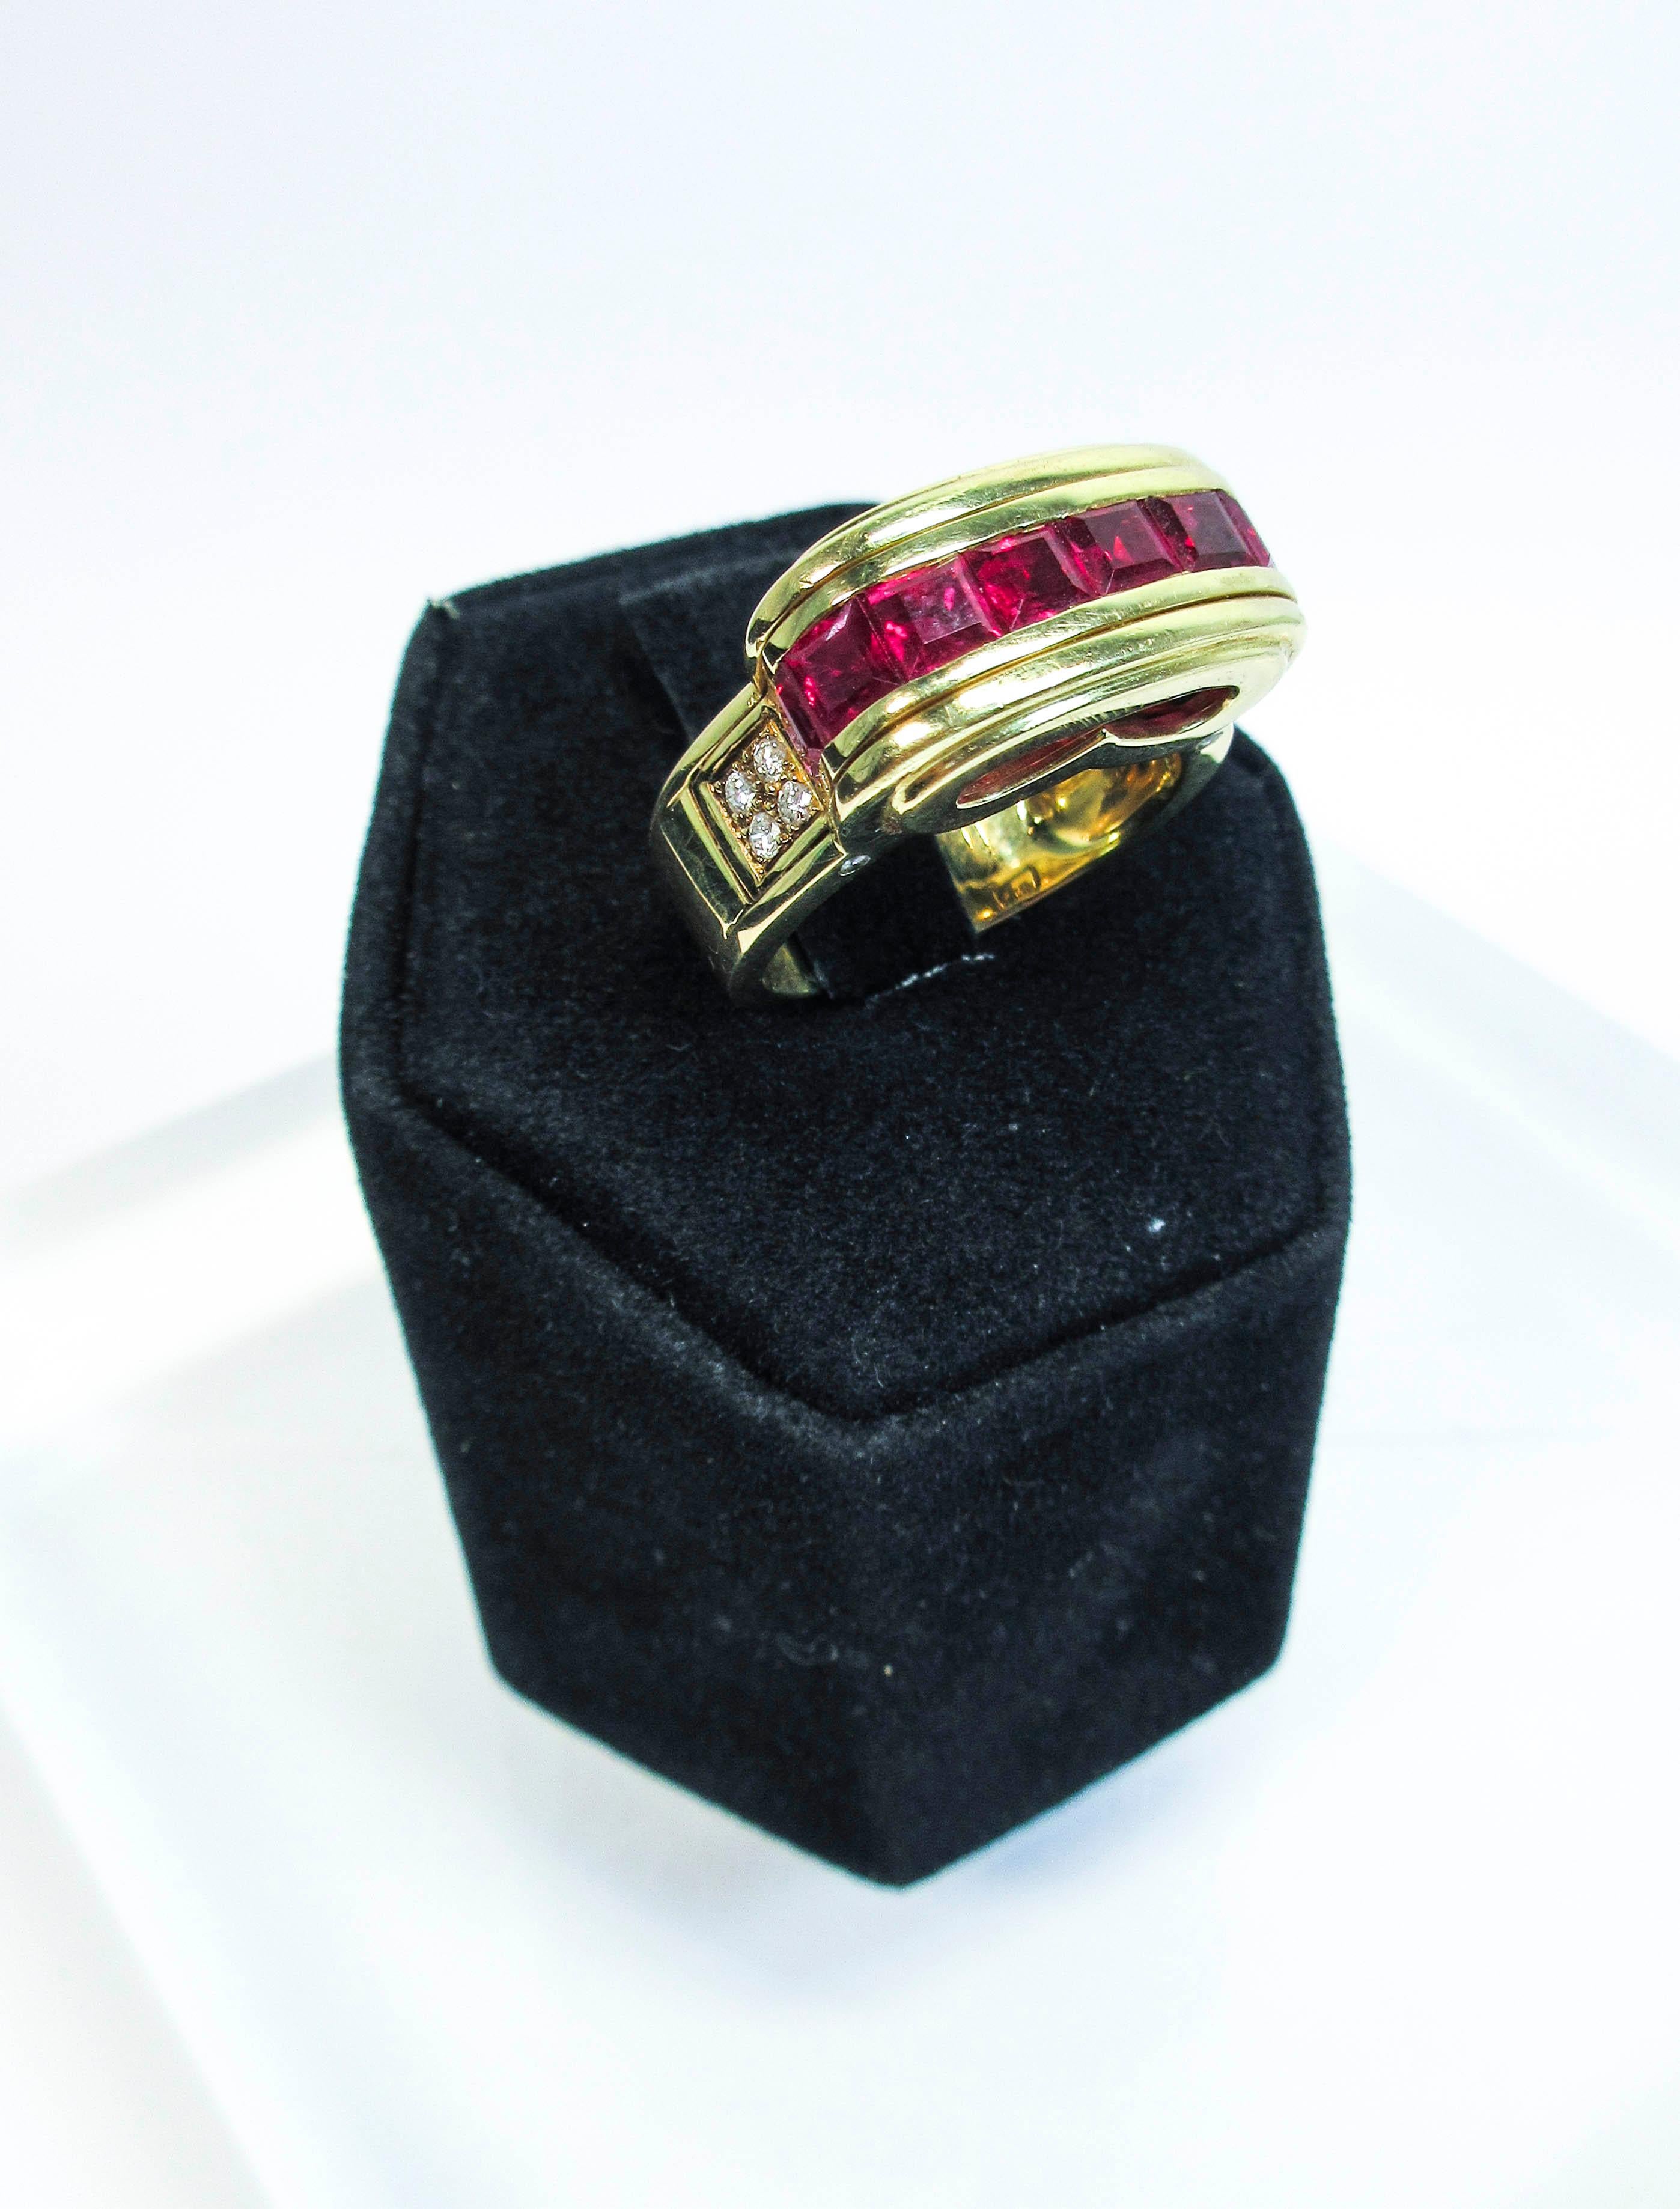 This wonderful Mouawad design is composed of 18kt yellow gold. The setting features a raised design with ruby center stones and side diamond accents. There are approximately 0.14cts of VS/F diamonds. Please feel free to ask us any questions you may